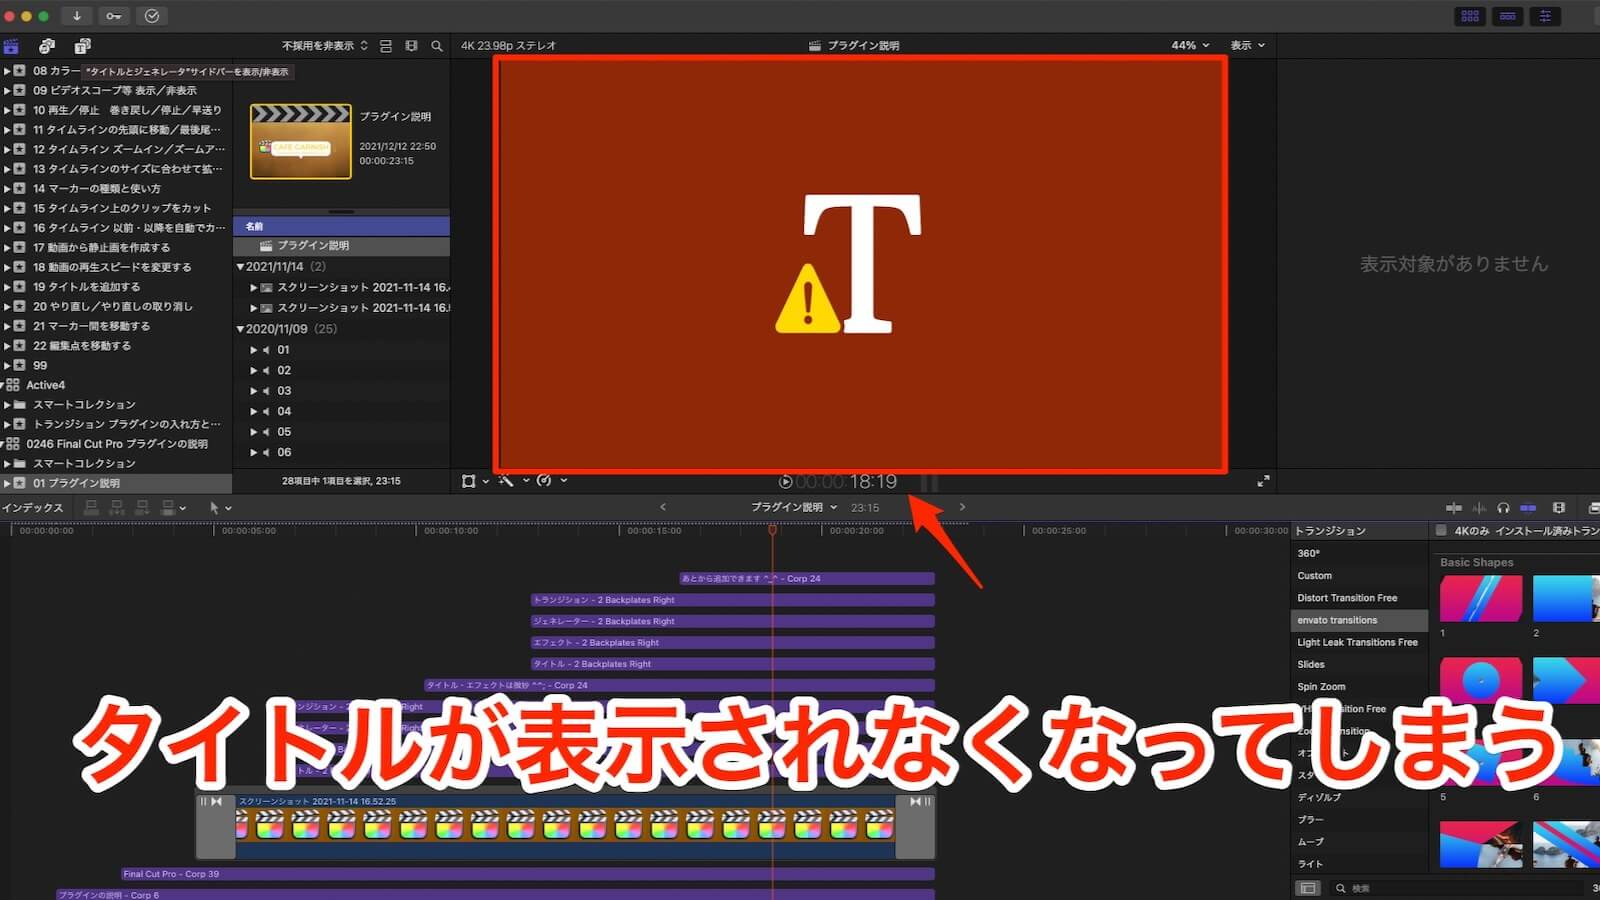 Images where the Final Cut Pro title can no longer be displayed